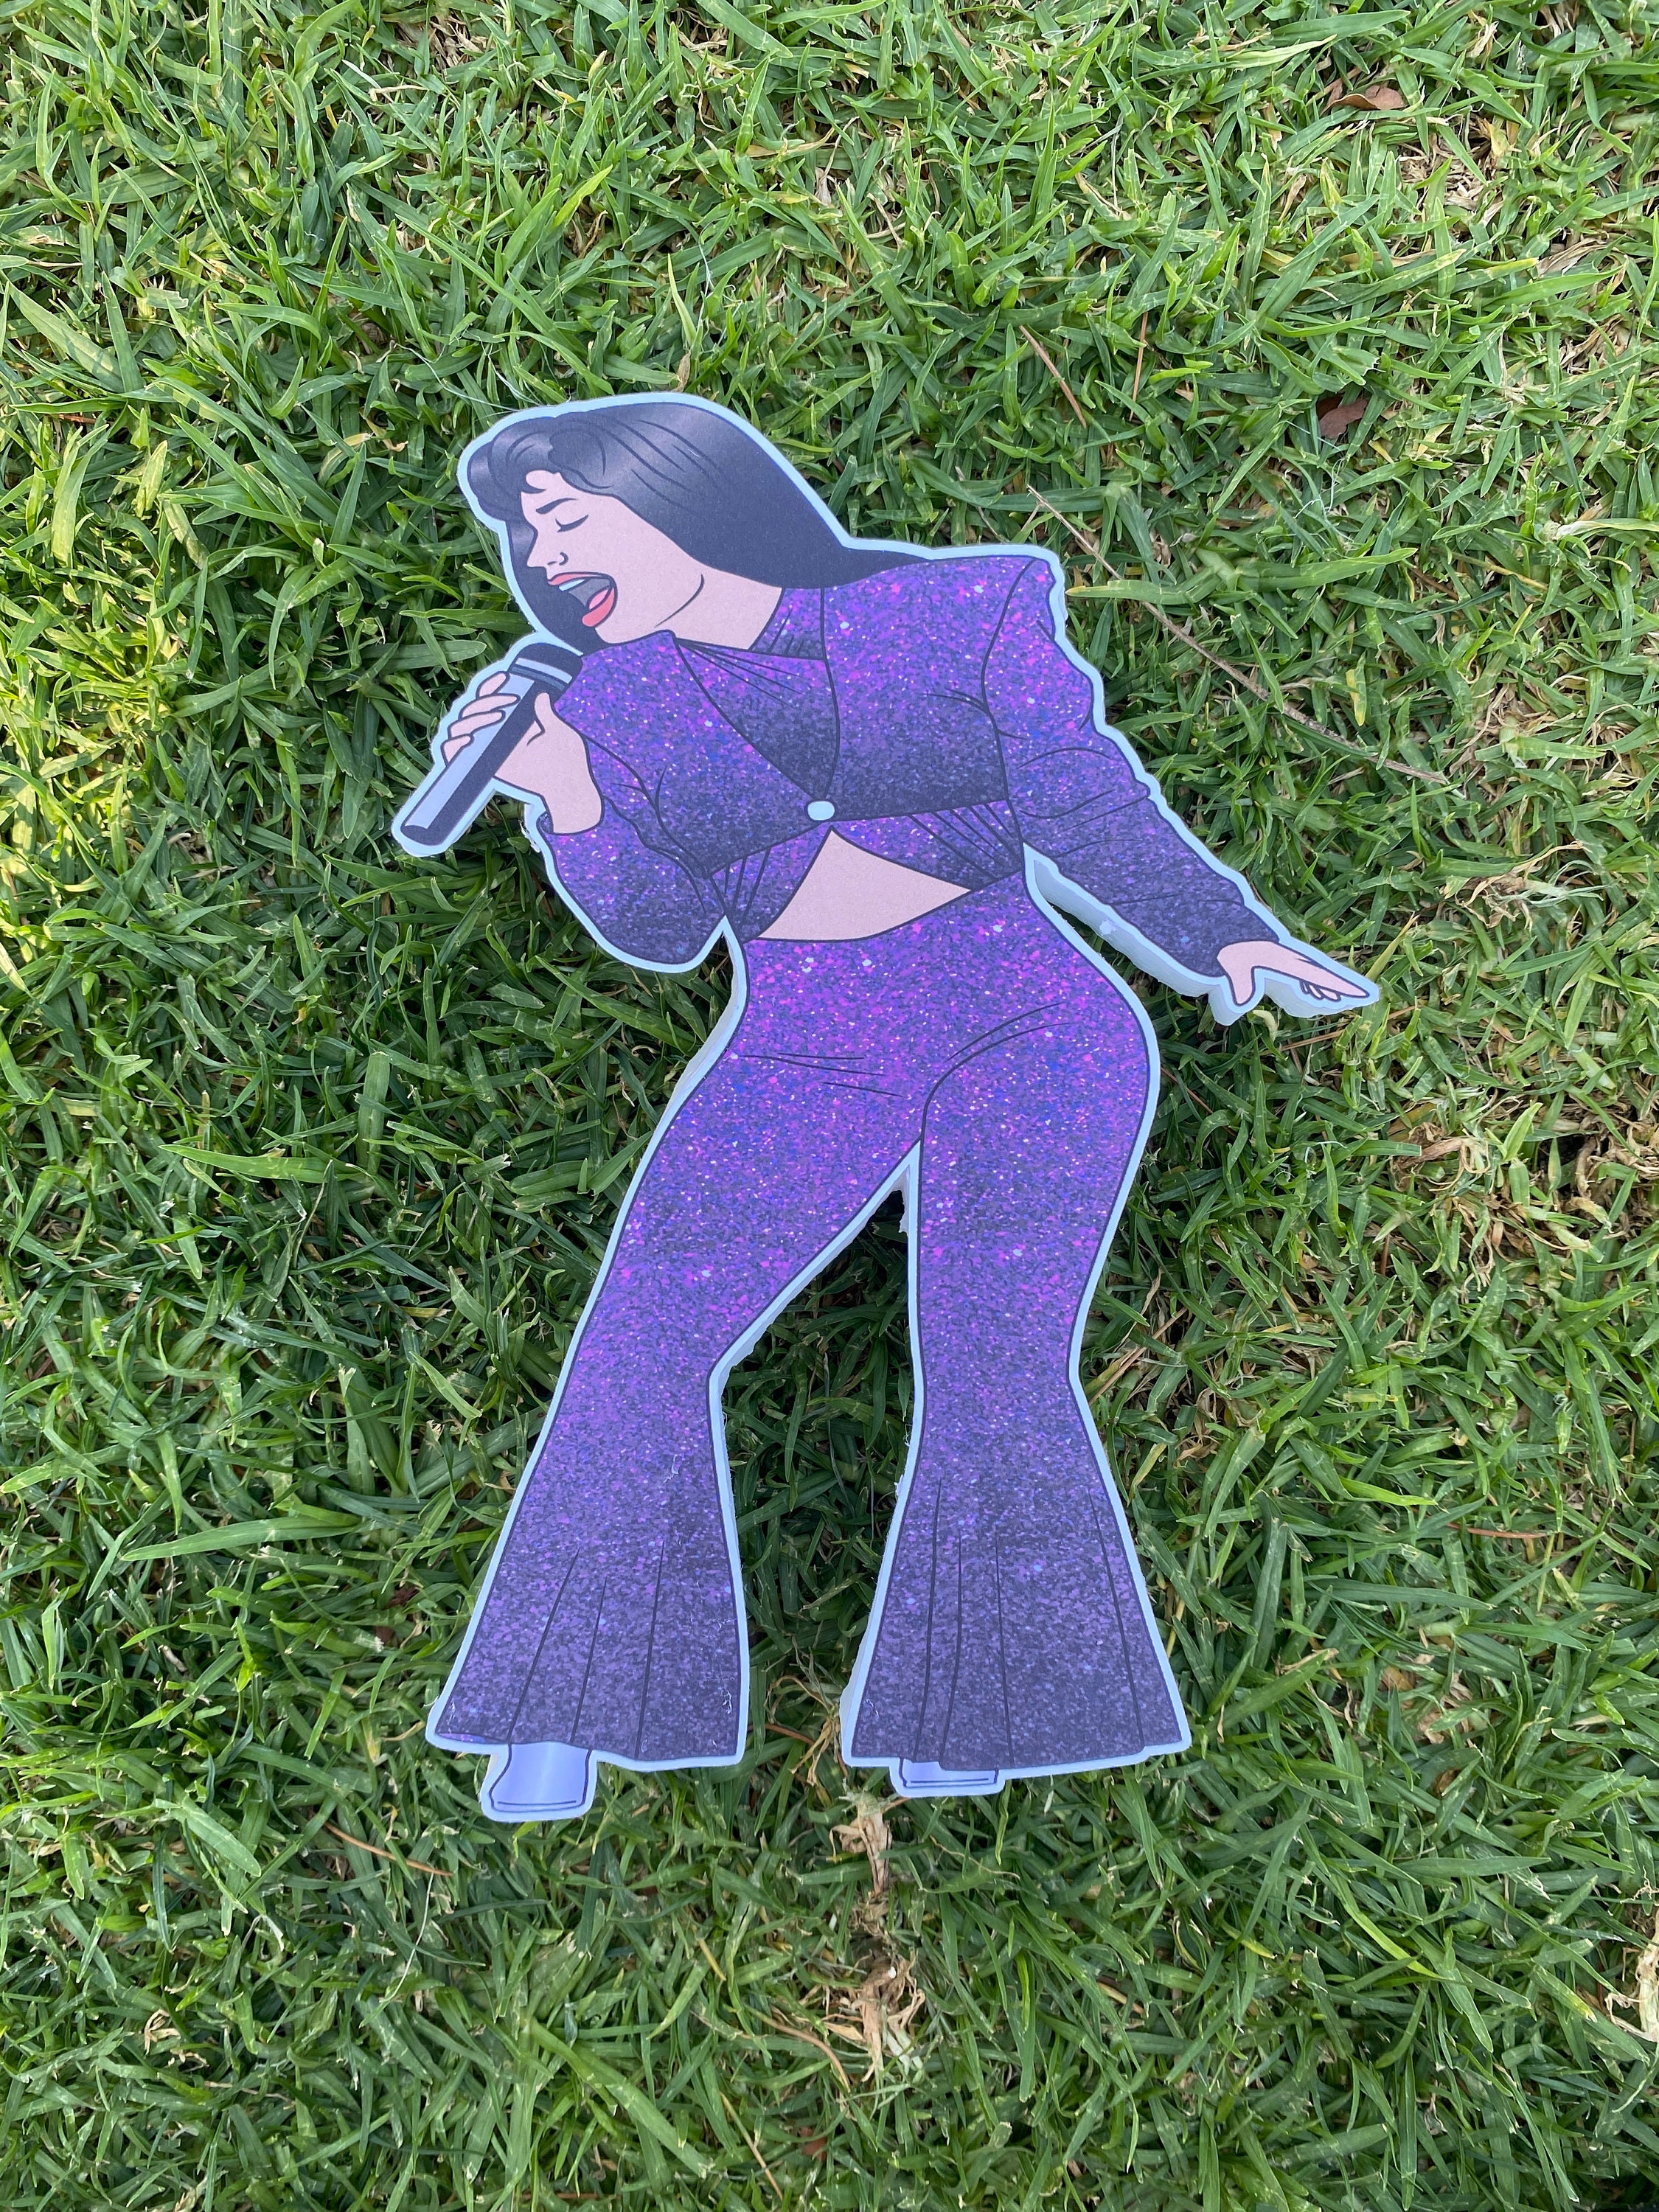 free selena quintanilla party decorations for Sale in Chino, CA